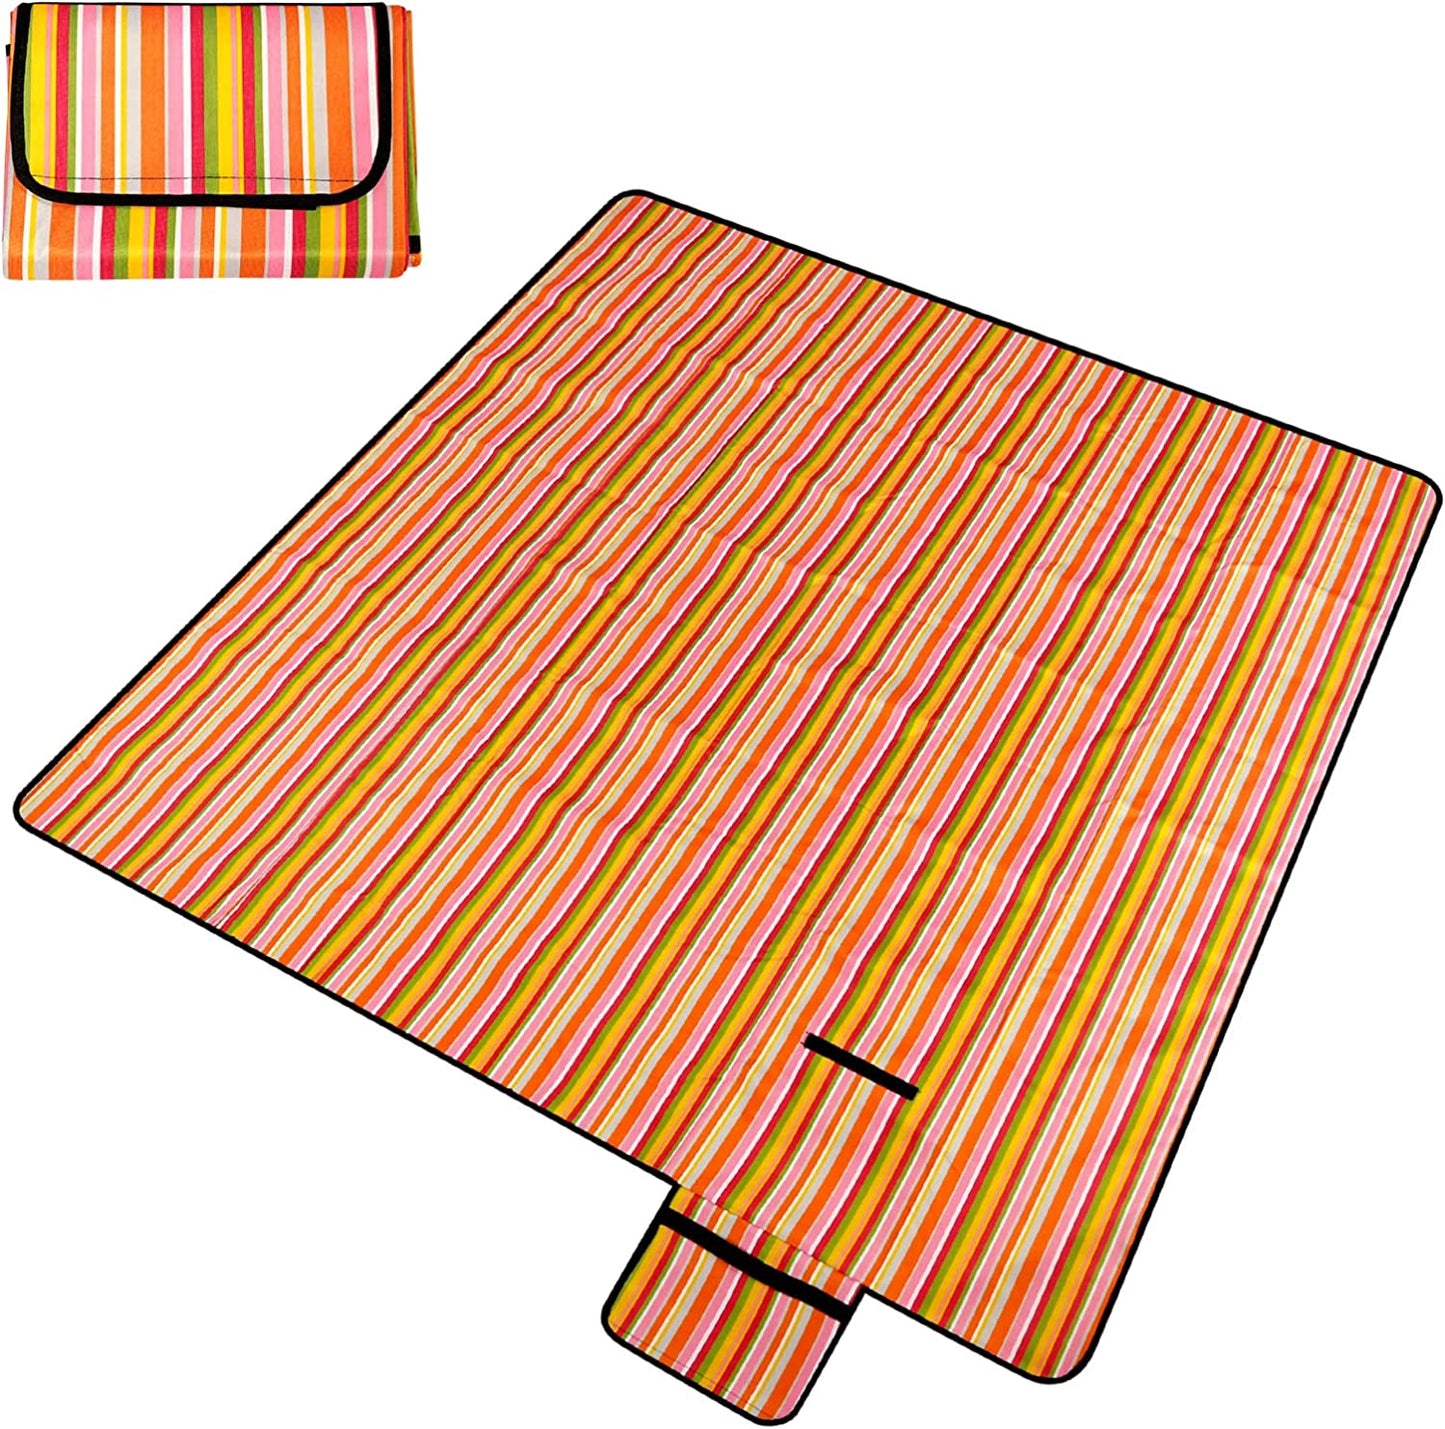 UNICOO Extra Large Outdoor Picnic Blankets, Sandproof & Waterproof Foldable Blankets for Beach, Park, Camping on Grass Picnic Blankets